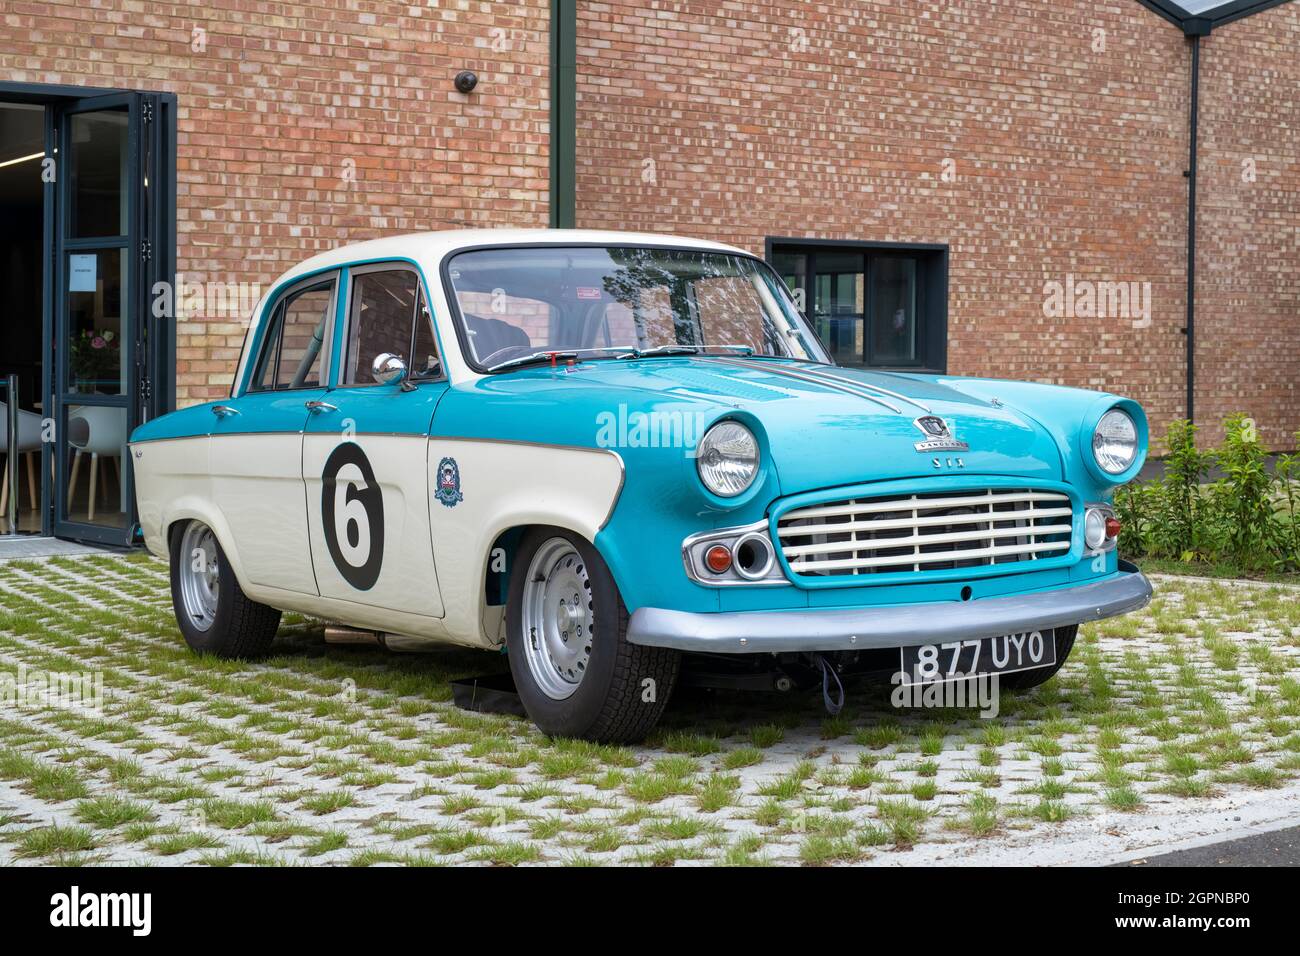 1961 Standard Vanguard at Bicester heritage centre sunday scramble event. Bicester, Oxfordshire, England Stock Photo